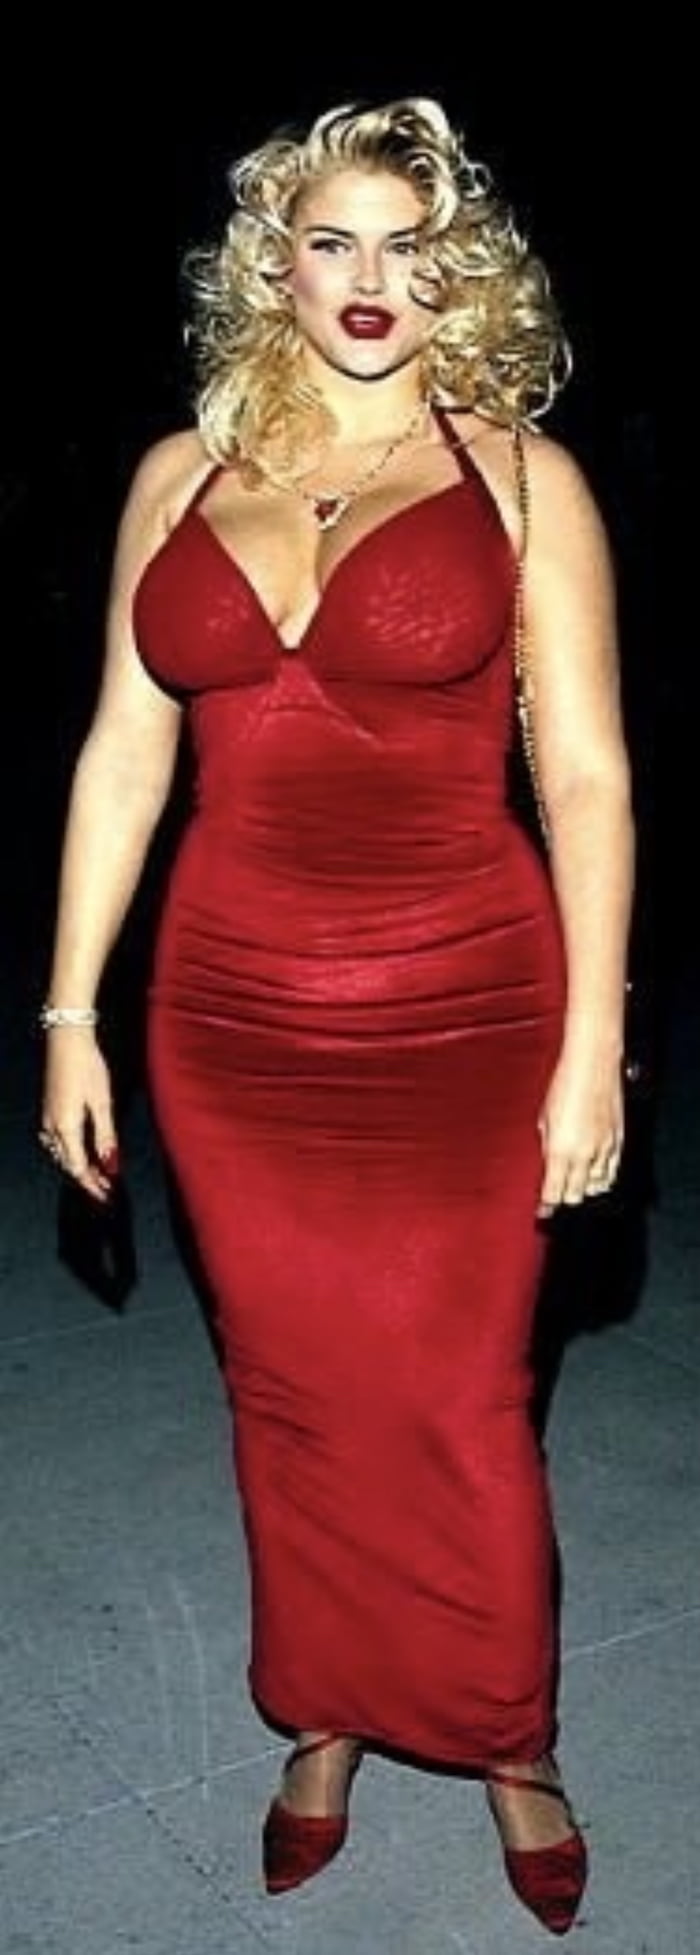 Anna Nicole Smith before she got fat at the Oscars party hop